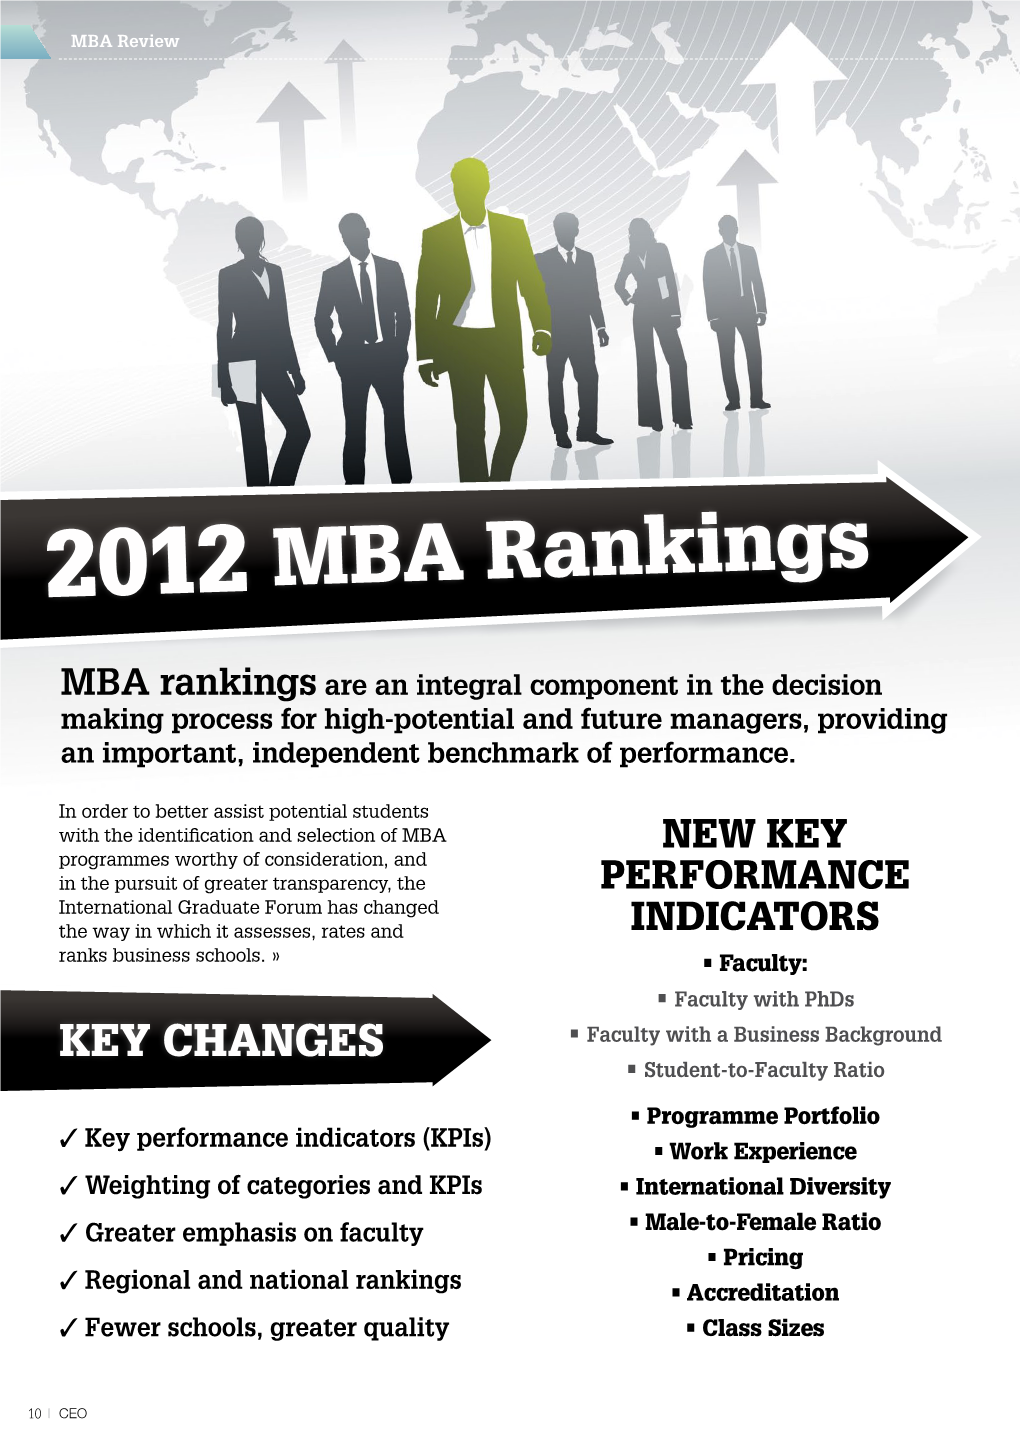 KEY CHANGES • Faculty with a Business Background • Student-To-Faculty Ratio